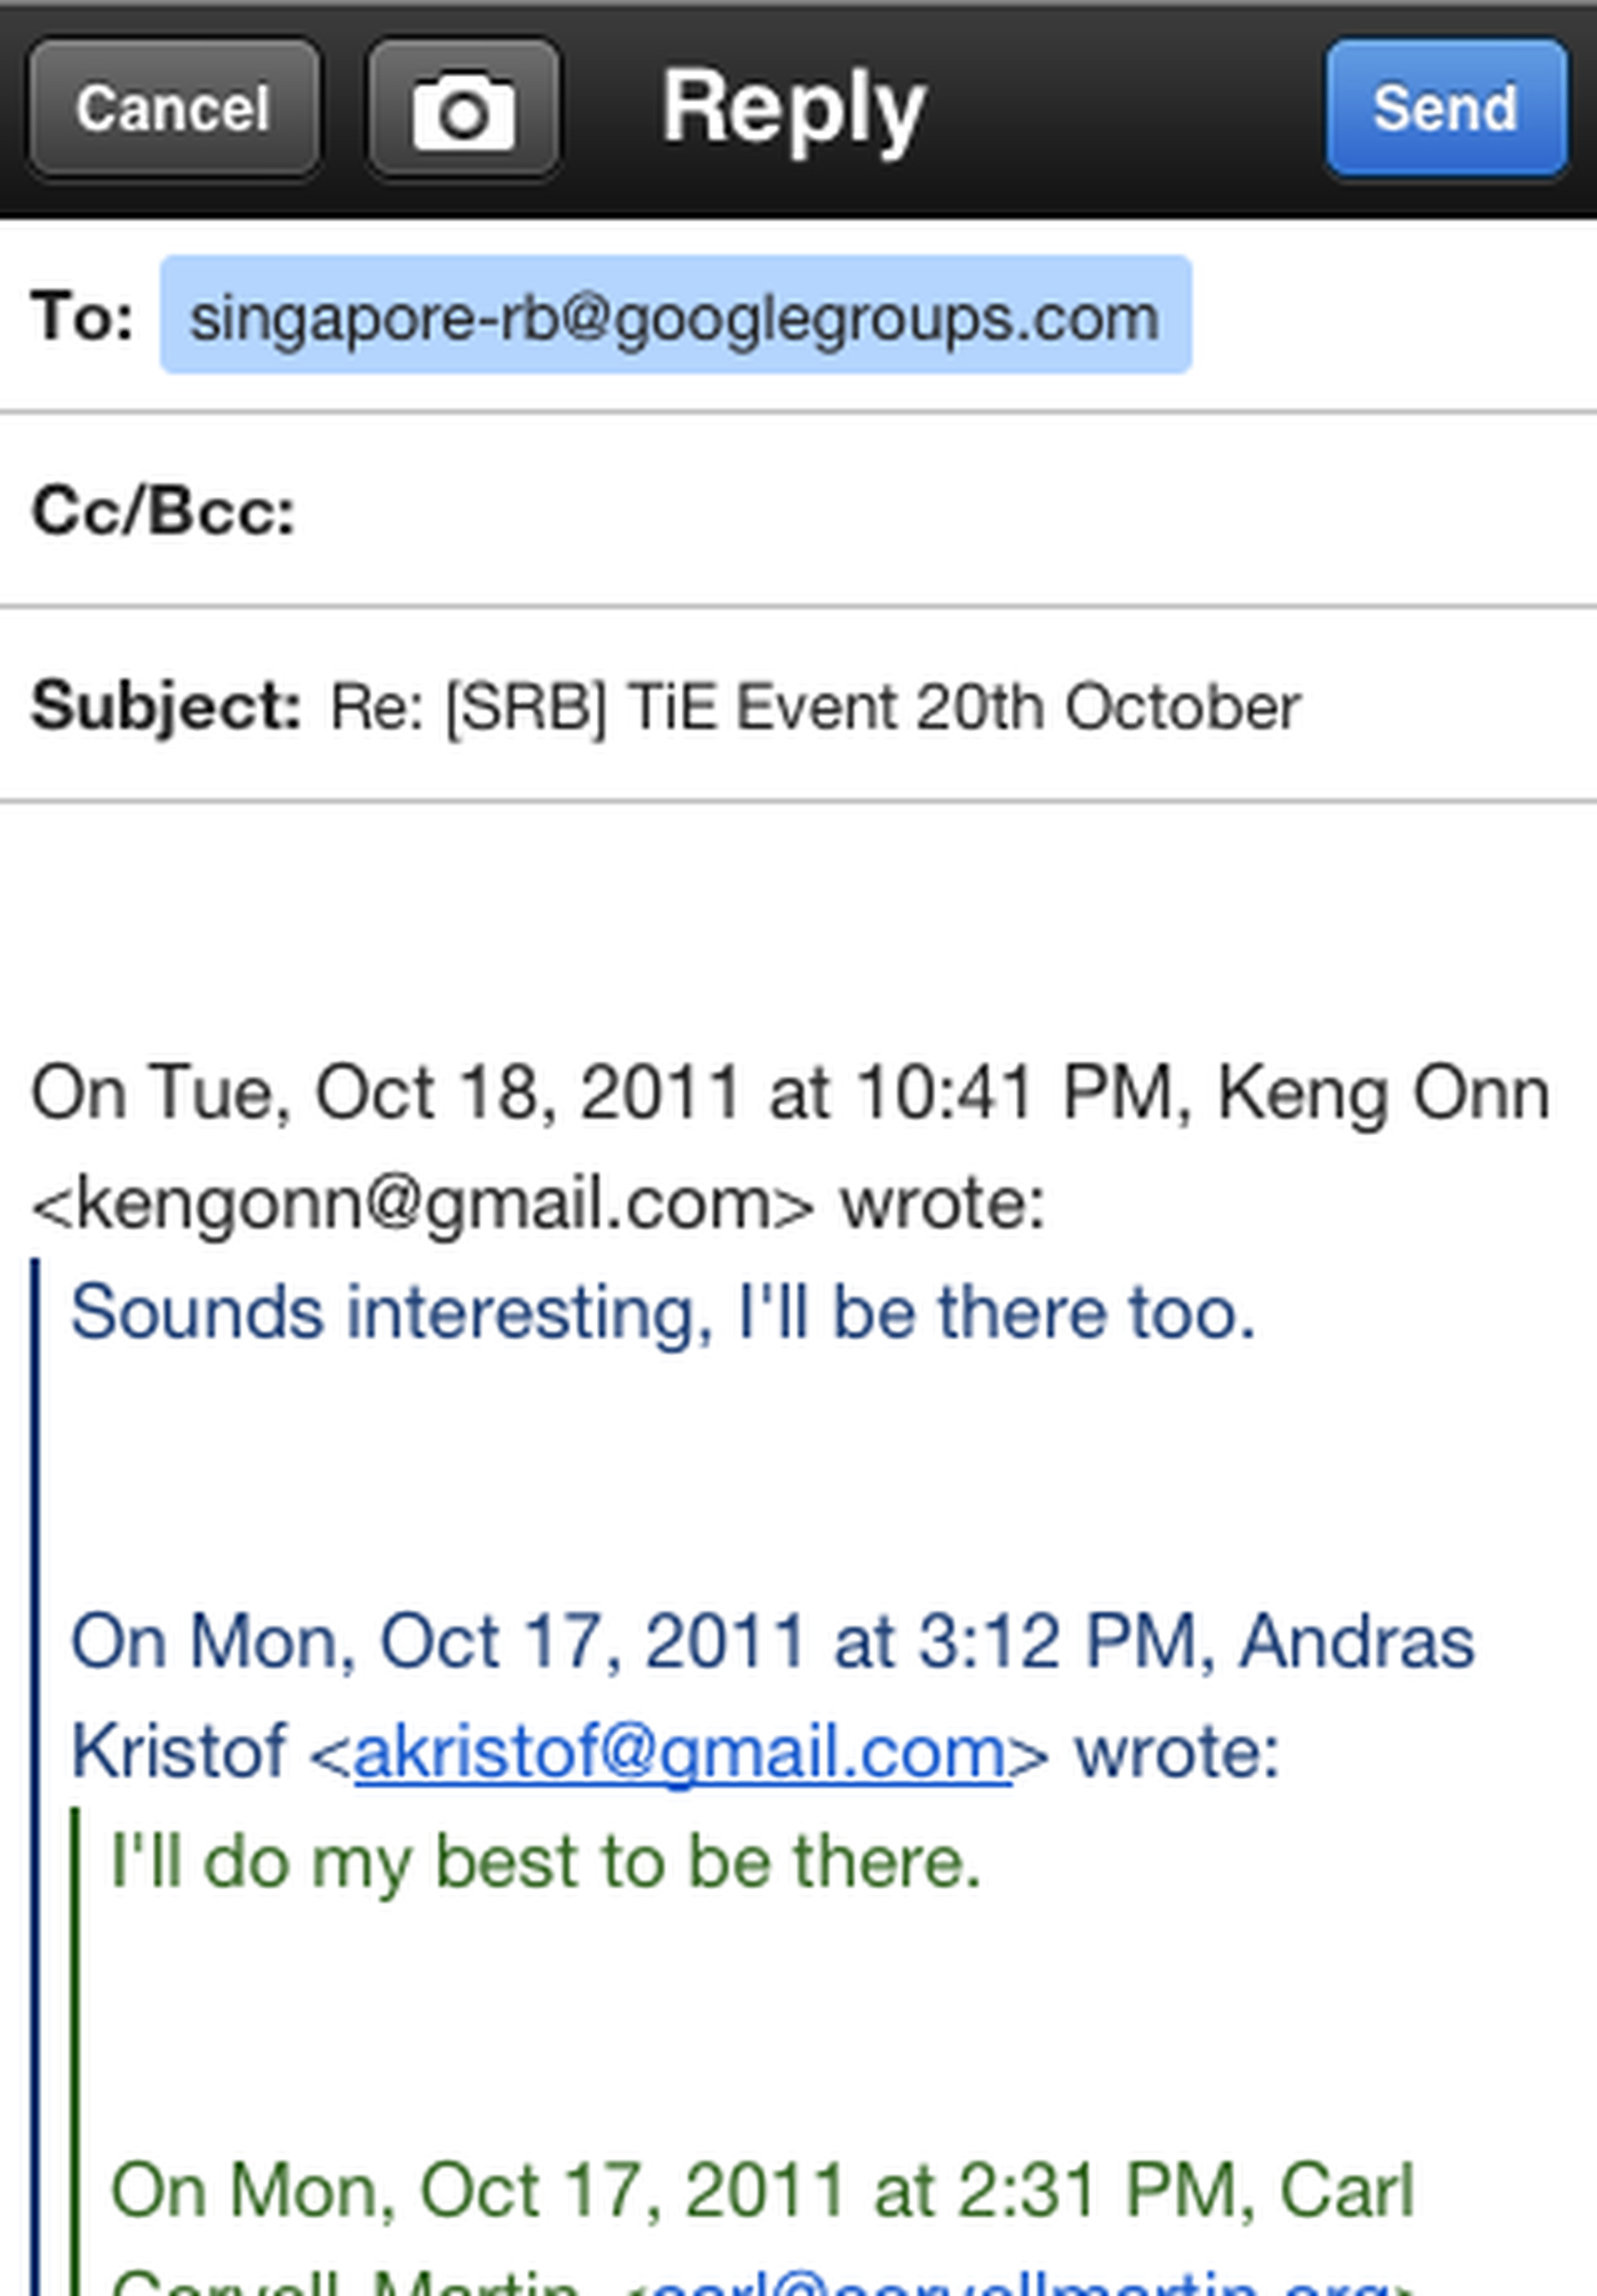 Sent Gmail client for iOS 